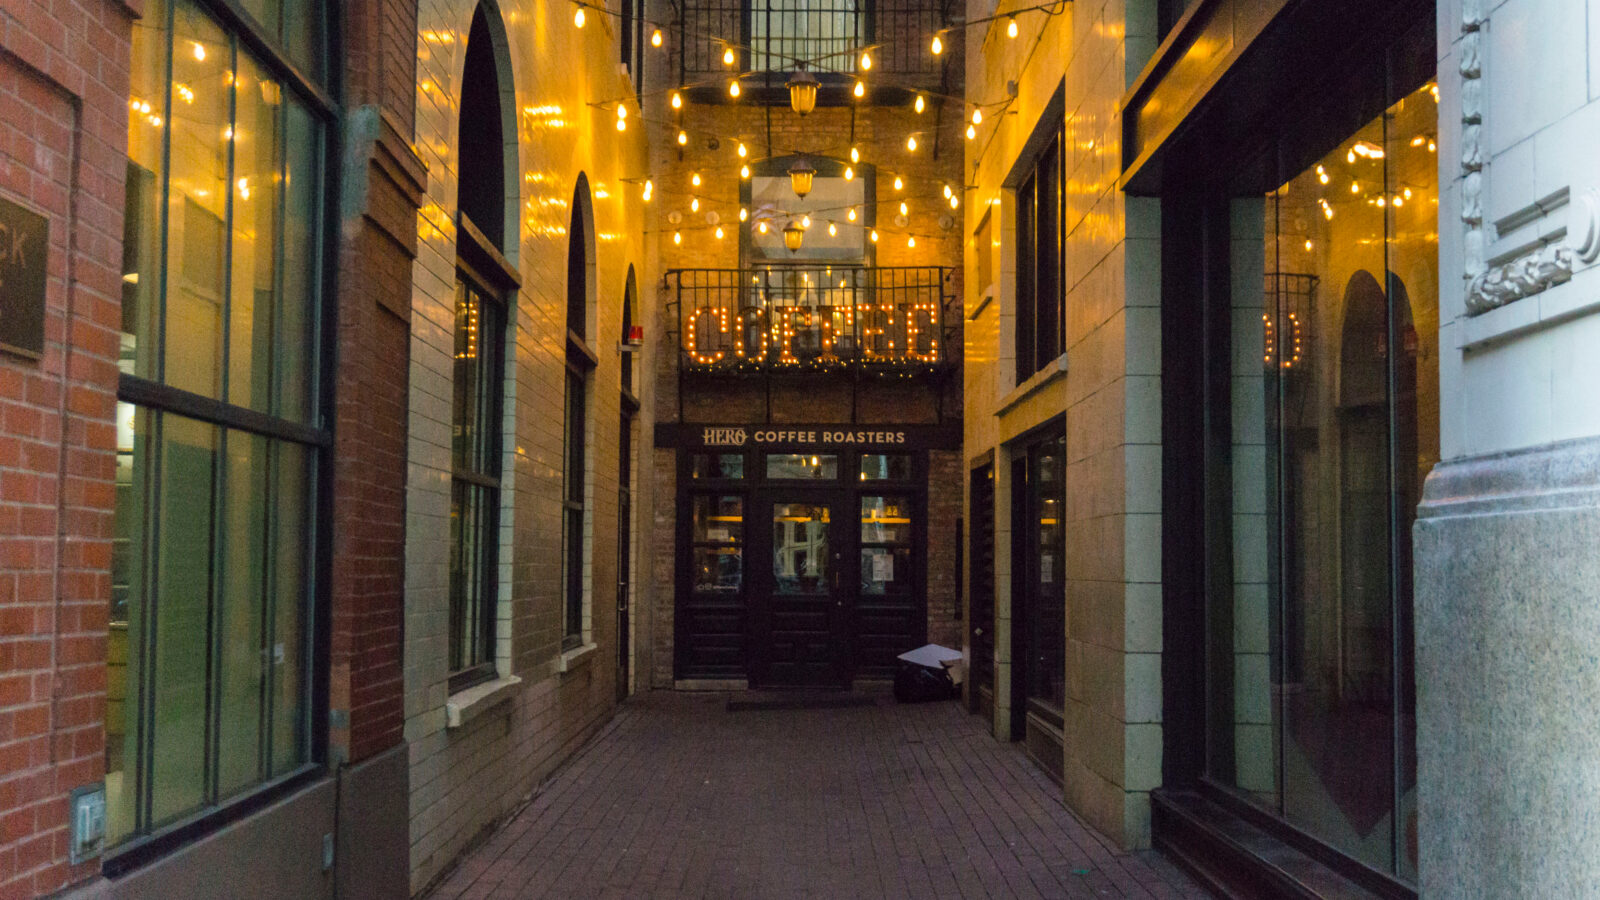 The front exterior in an alley of one of the best coffee shops in Chicago. There are string lights in the alley, and a large lit sign that says 'coffee'